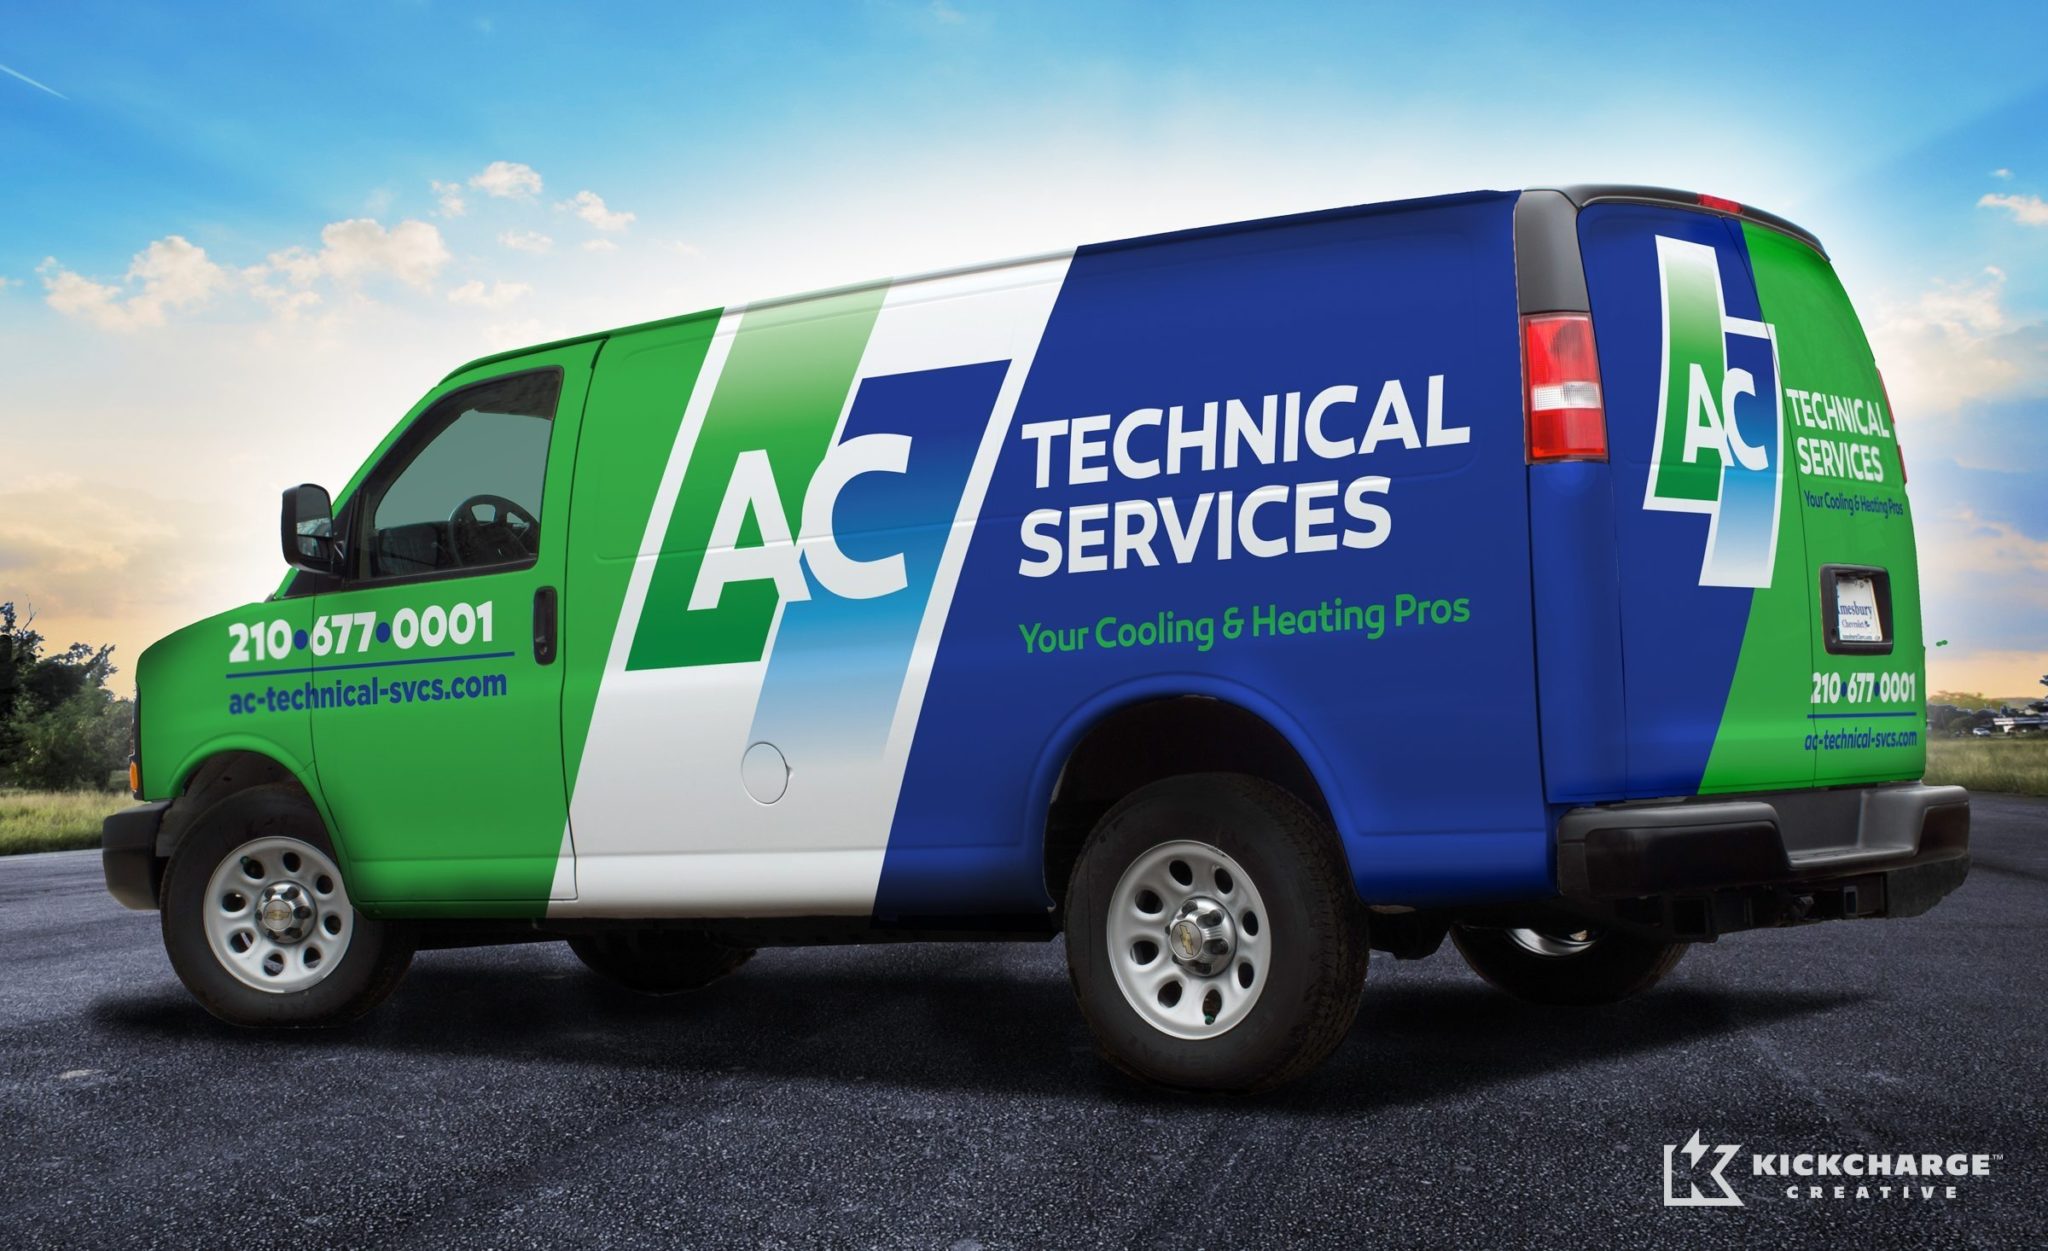 The best vehicle wraps use simple, easy-to-read graphics, as this wrap for AC Technical Services shows.